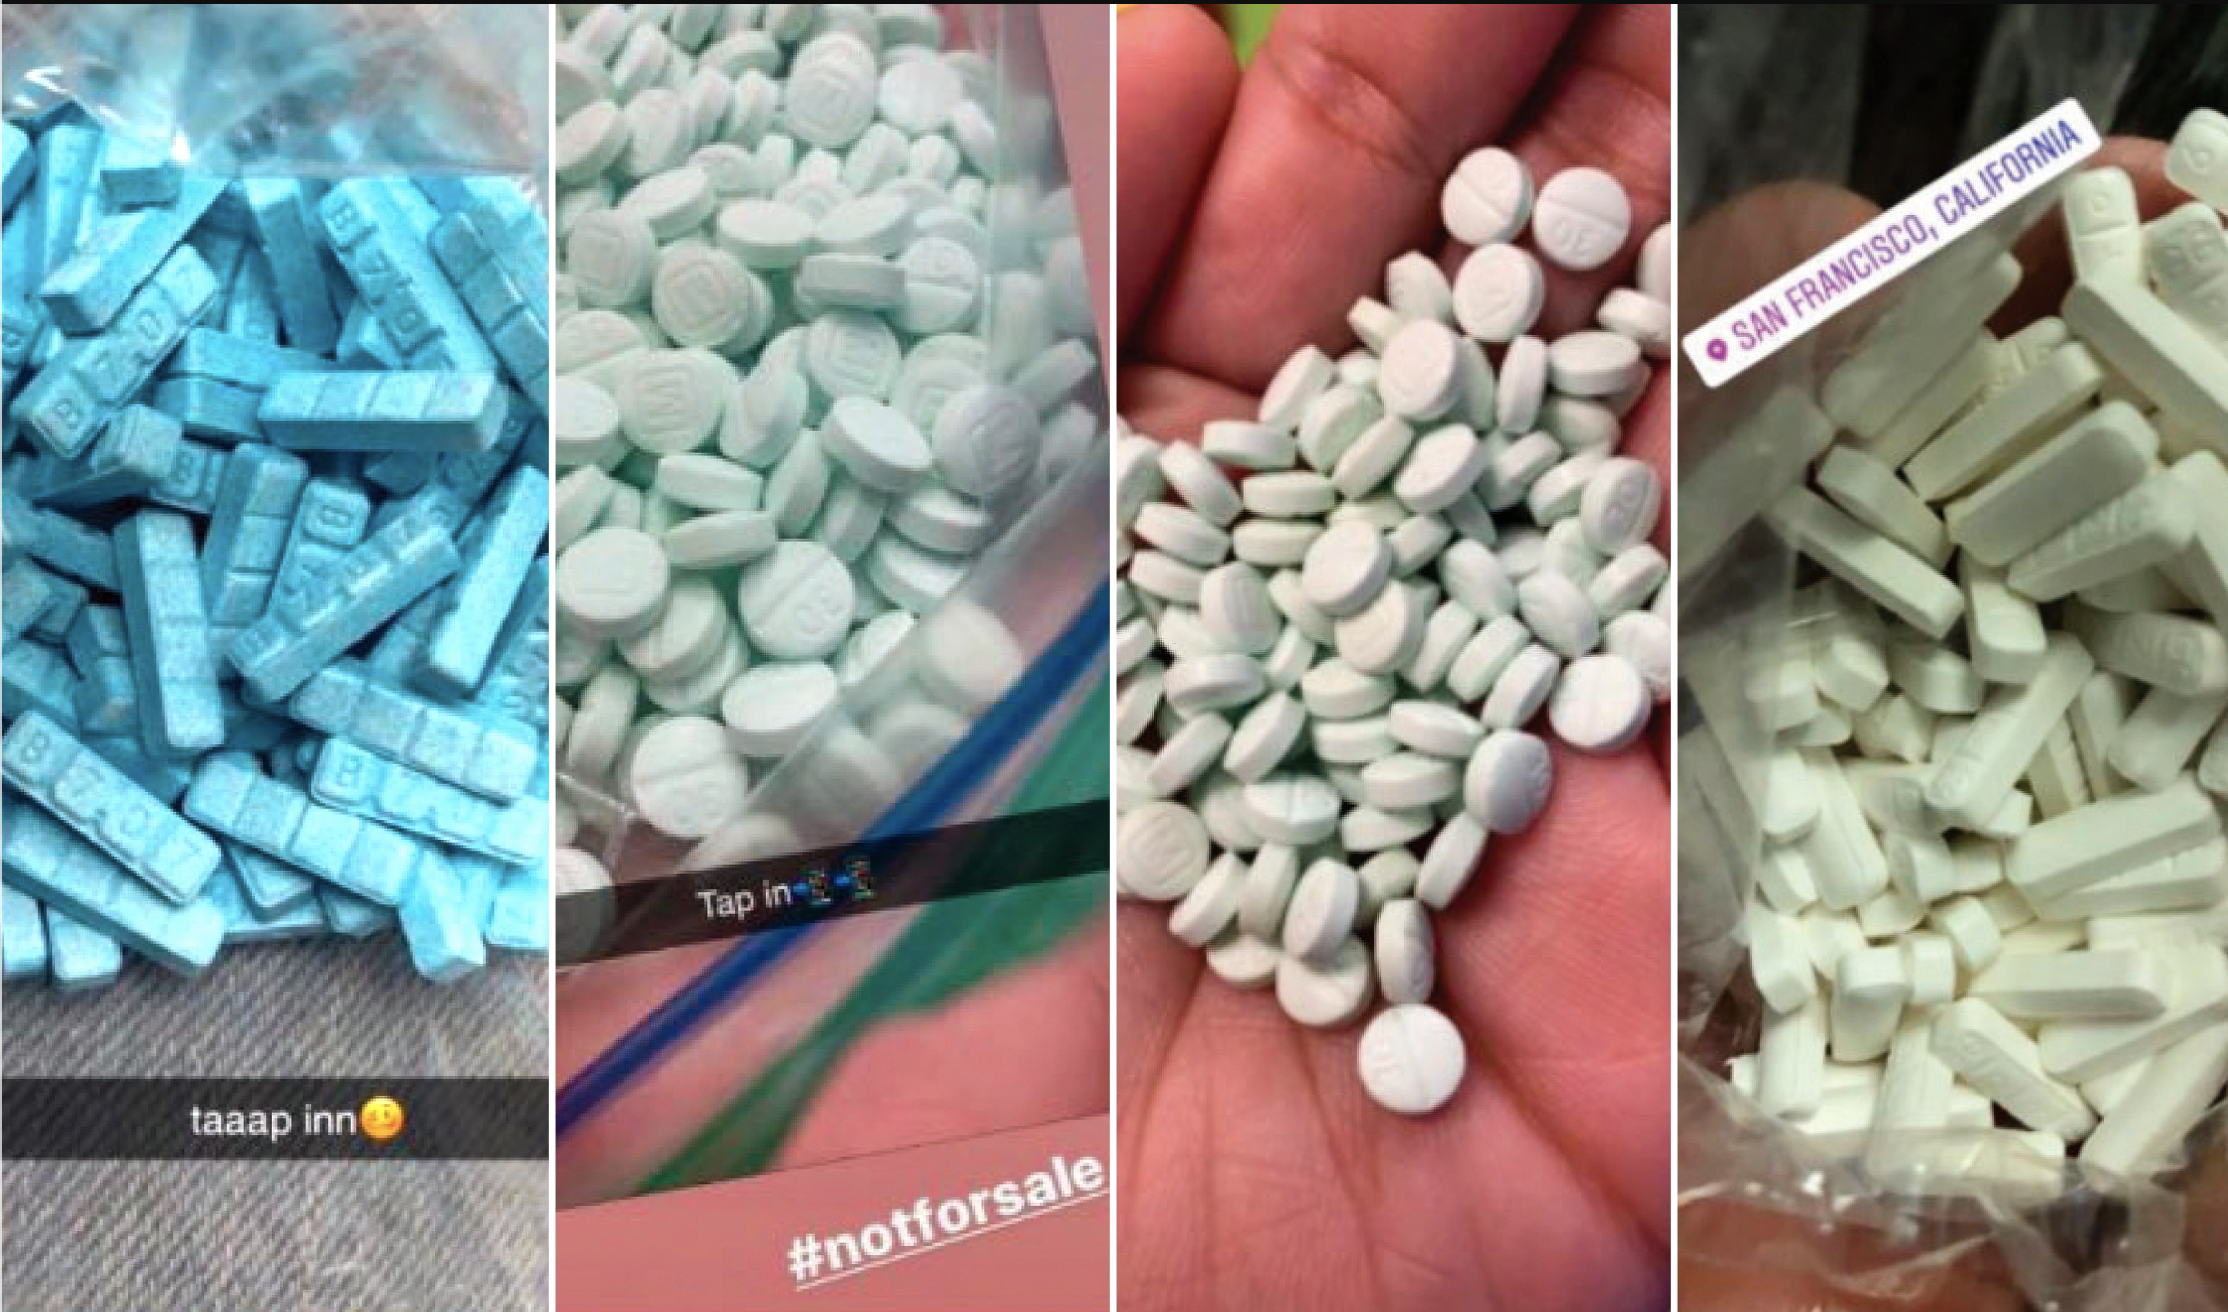 Drugs advertised on Instagram in the Oakland case (Image: Mercury News)